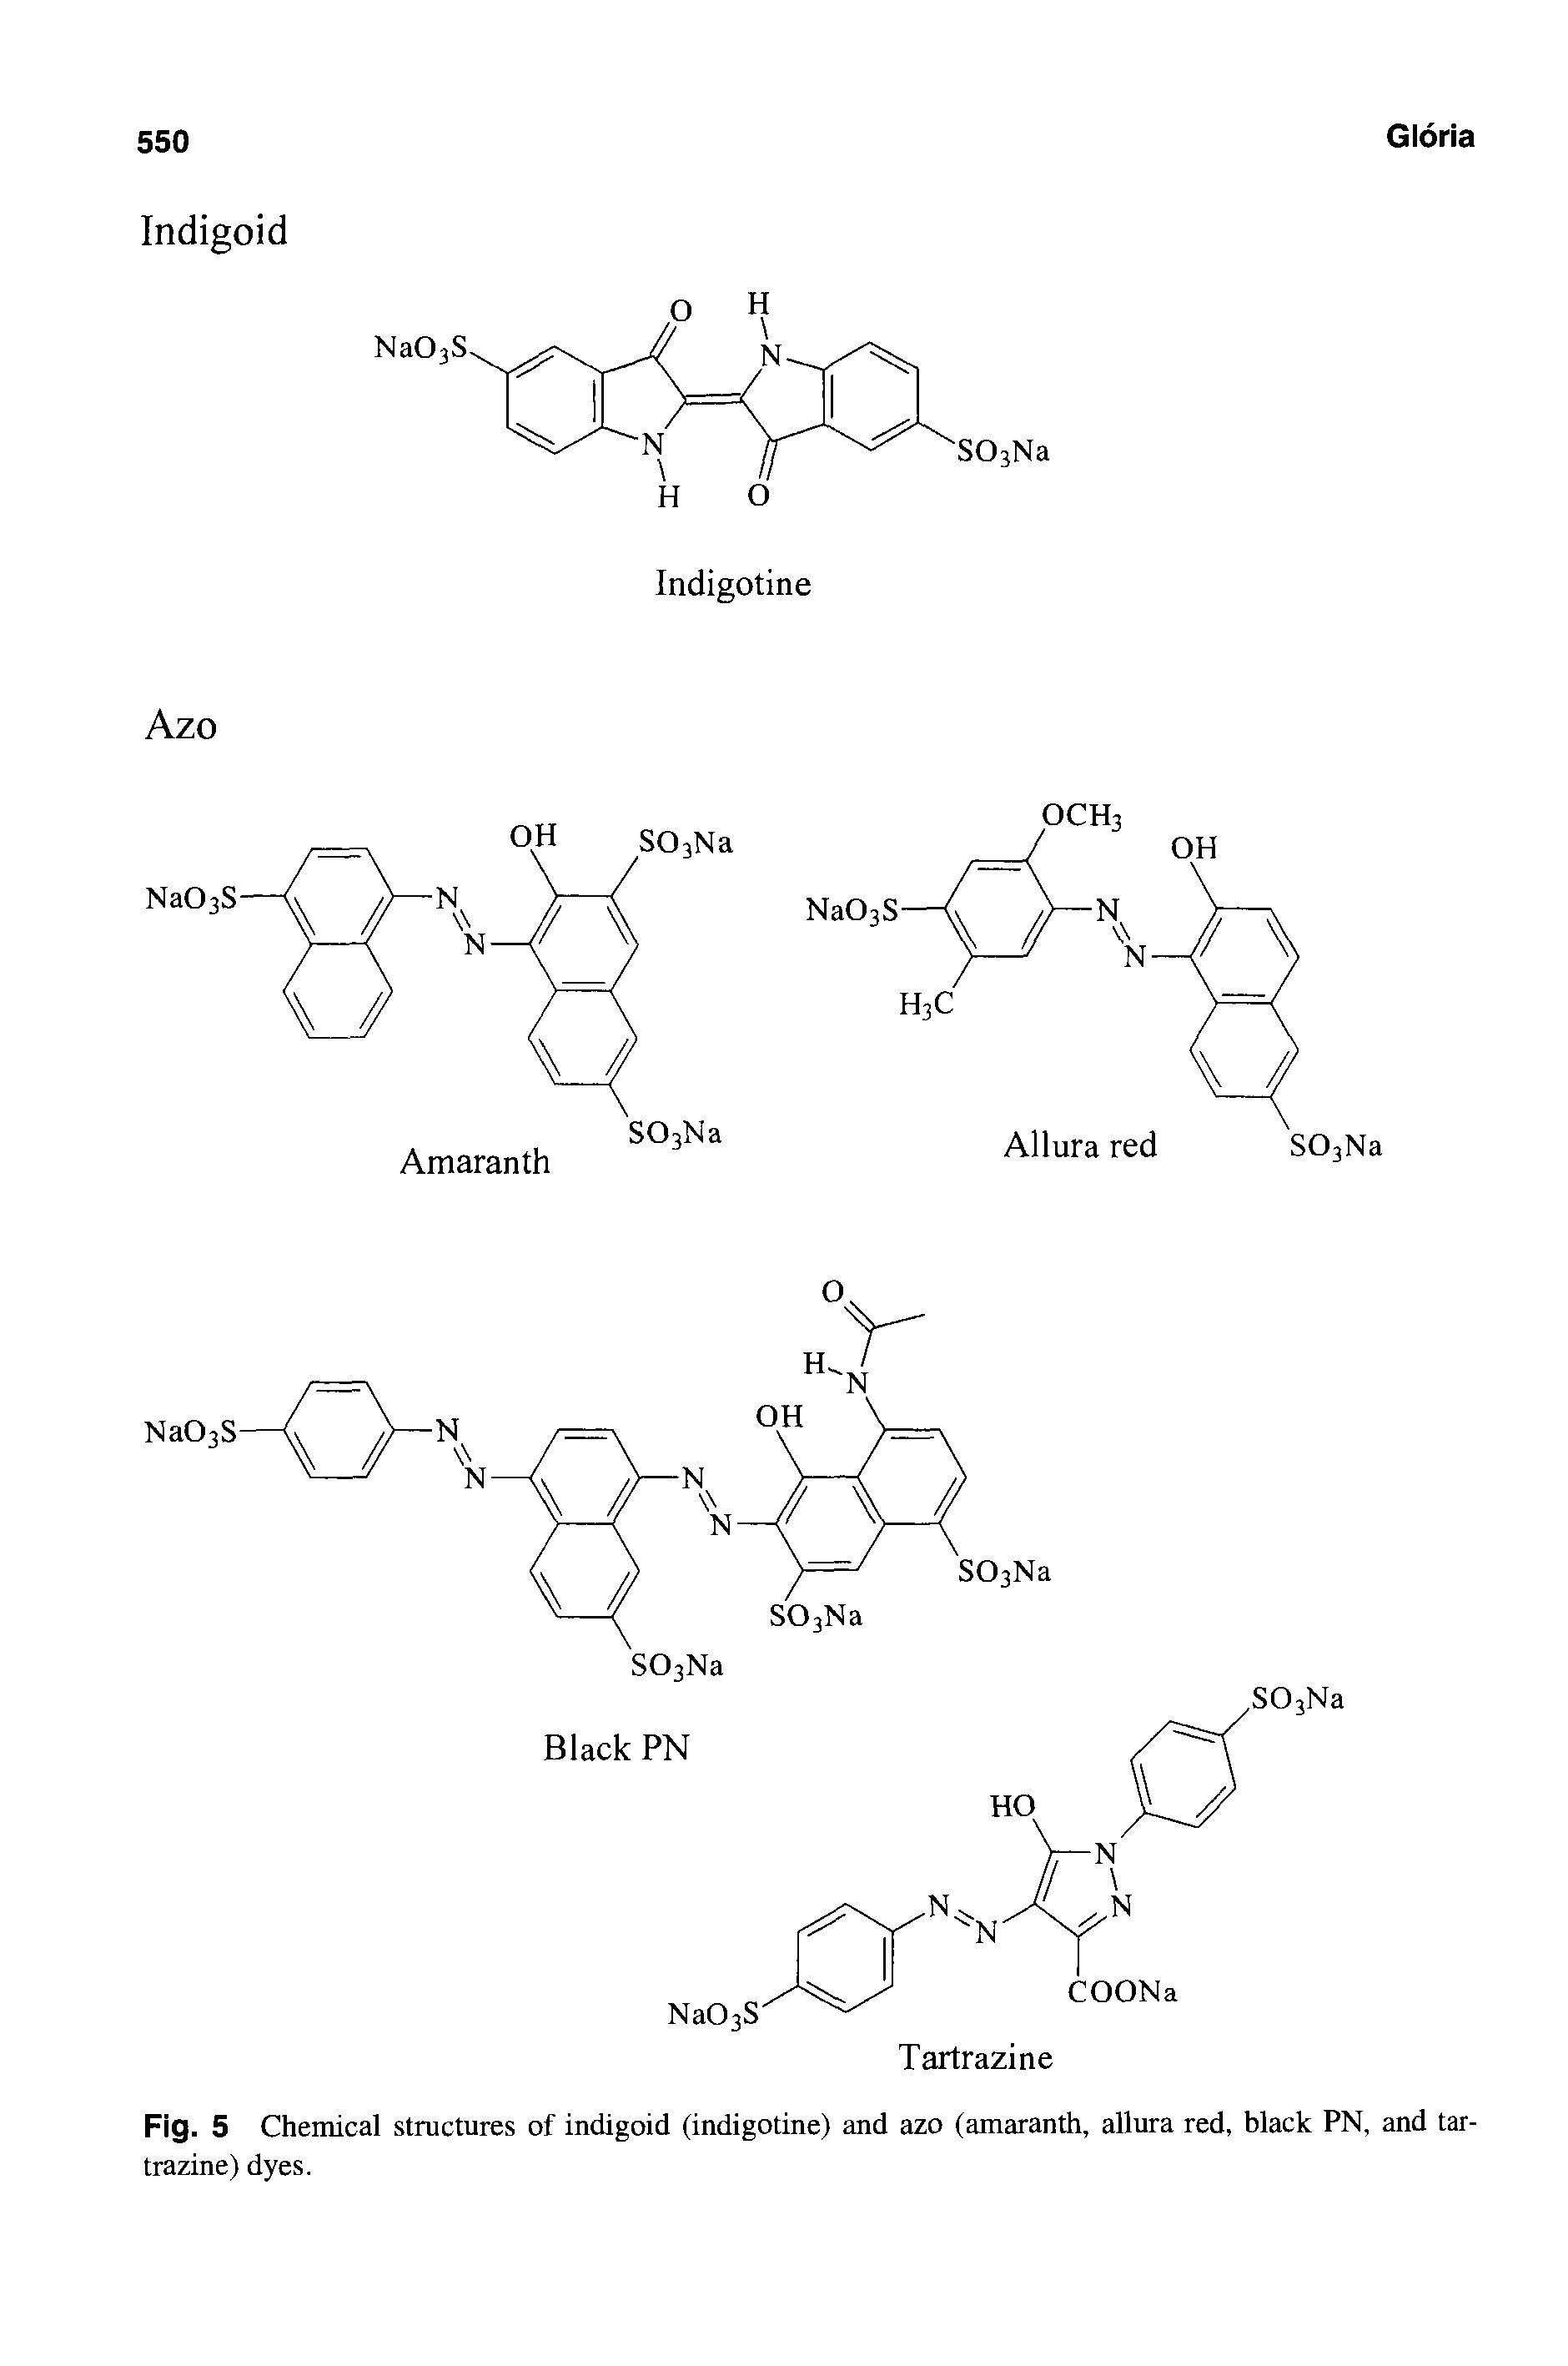 Fig. 5 Chemical structures of indigoid (indigotine) and azo (amaranth, allura red, black PN, and tartrazine) dyes.